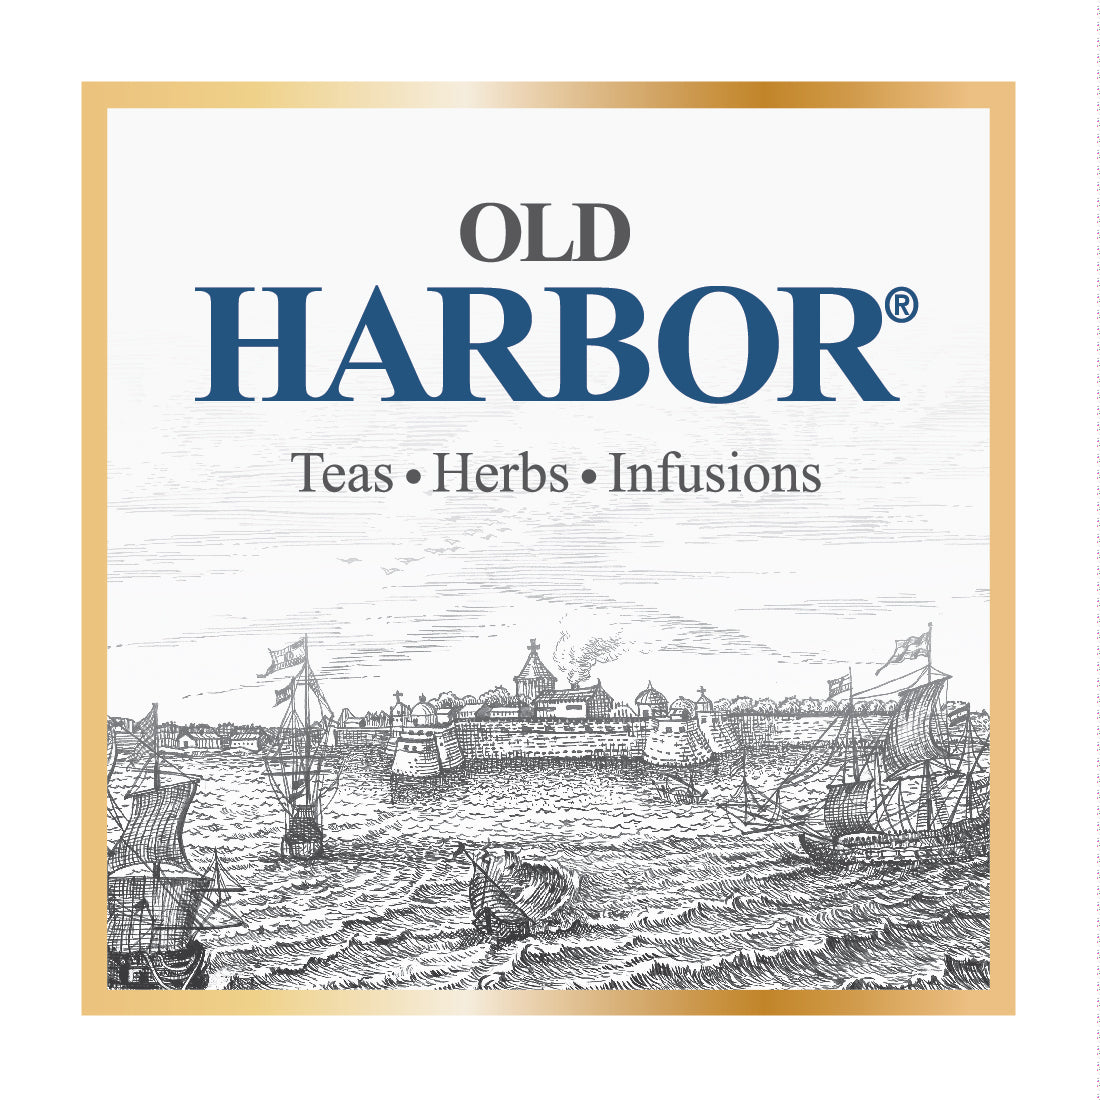 Old Harbor's worldwide reputation derives from applying 70 years of skill and experience to preserving and enhancing these natural qualities through sorting and blending techniques, coupled with state - of - the - art packaging, warehousing and logistics.